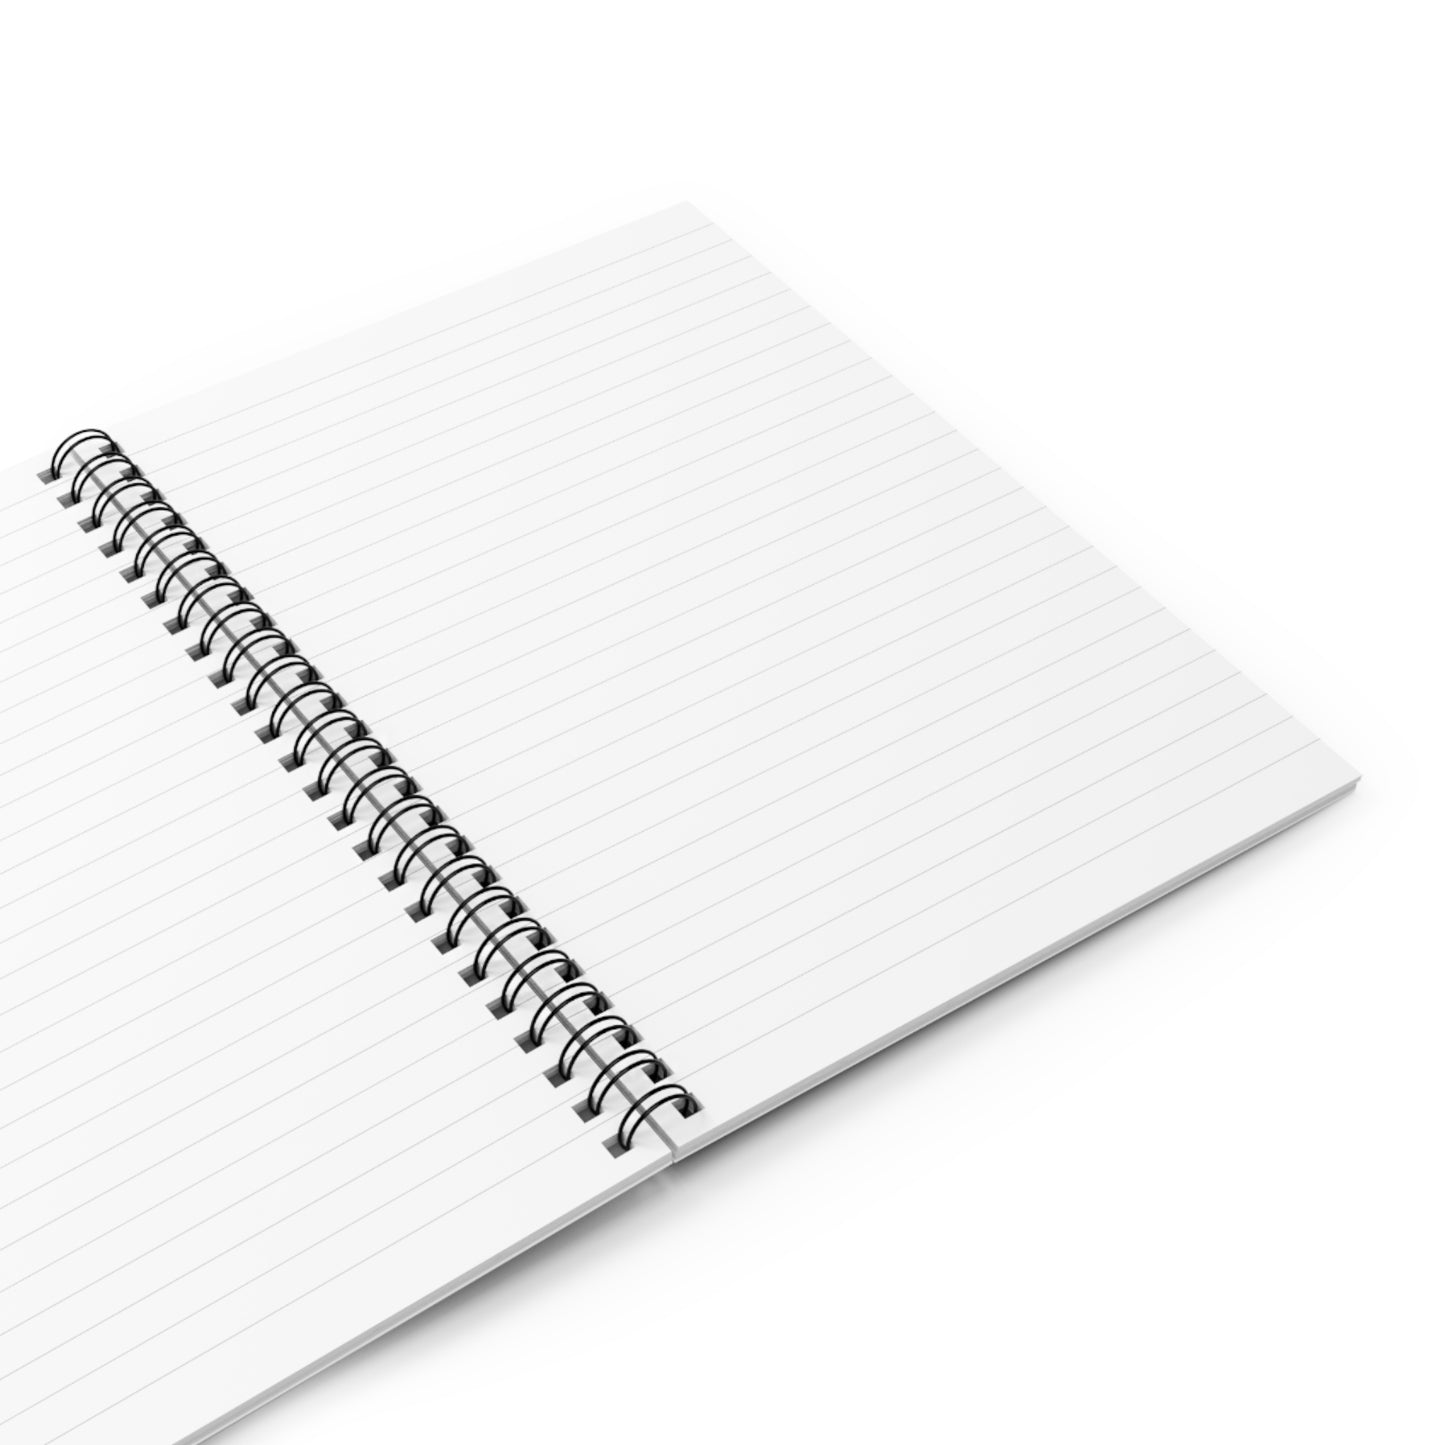 Spiral Notebook - Ruled Line - White Rose cover